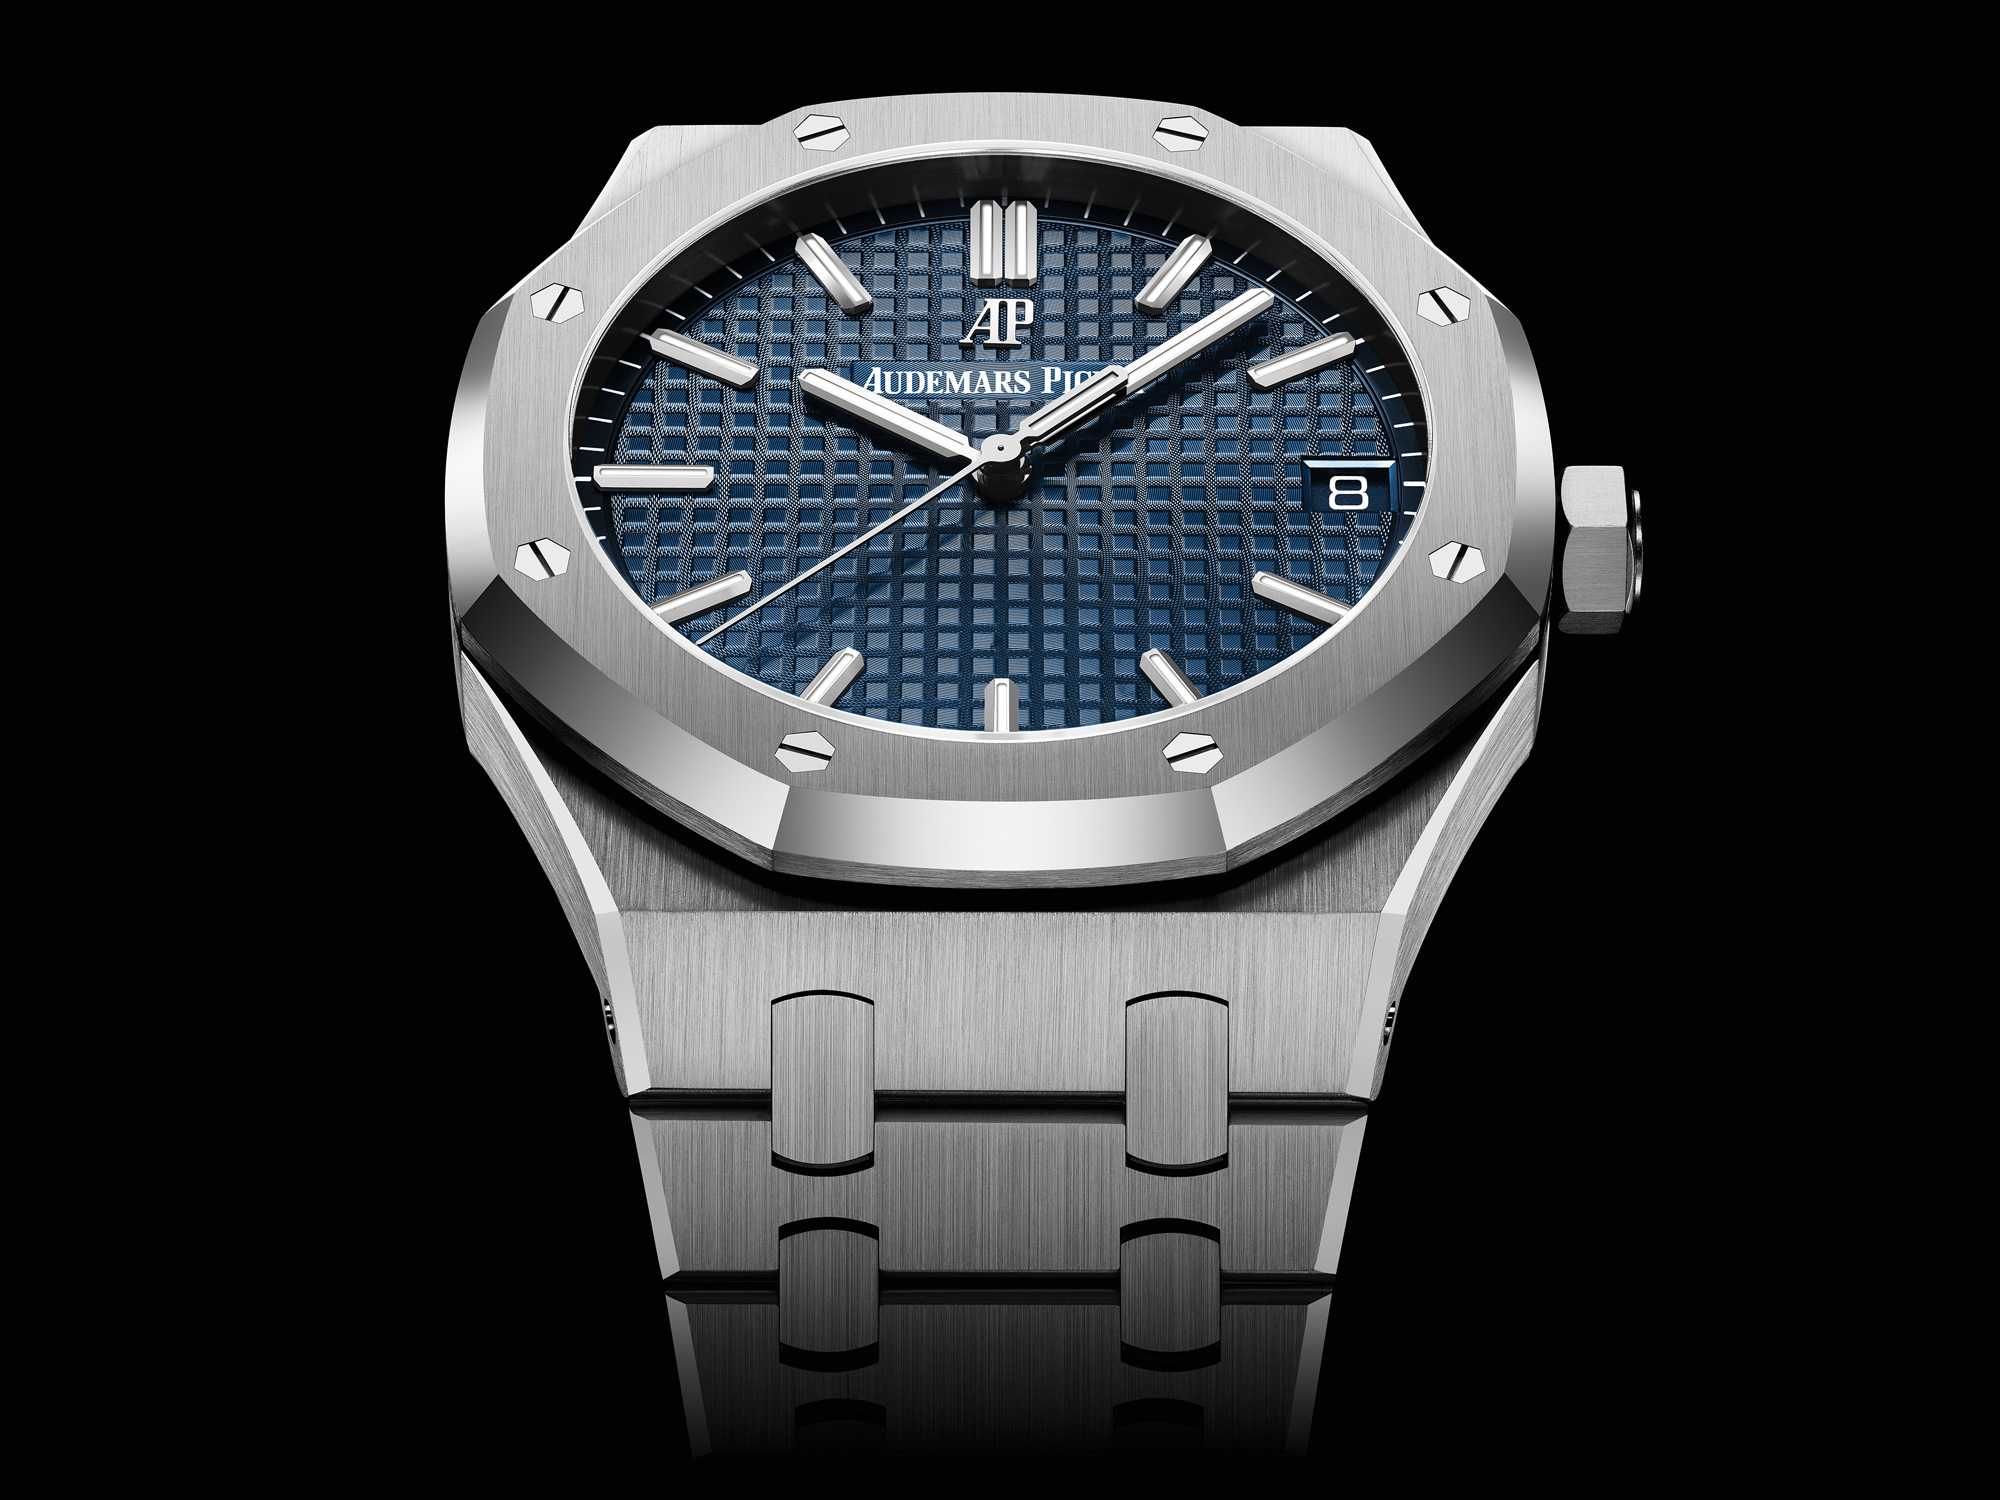 The Audemars Piguet Ultimate Buying Guide | Rubber B